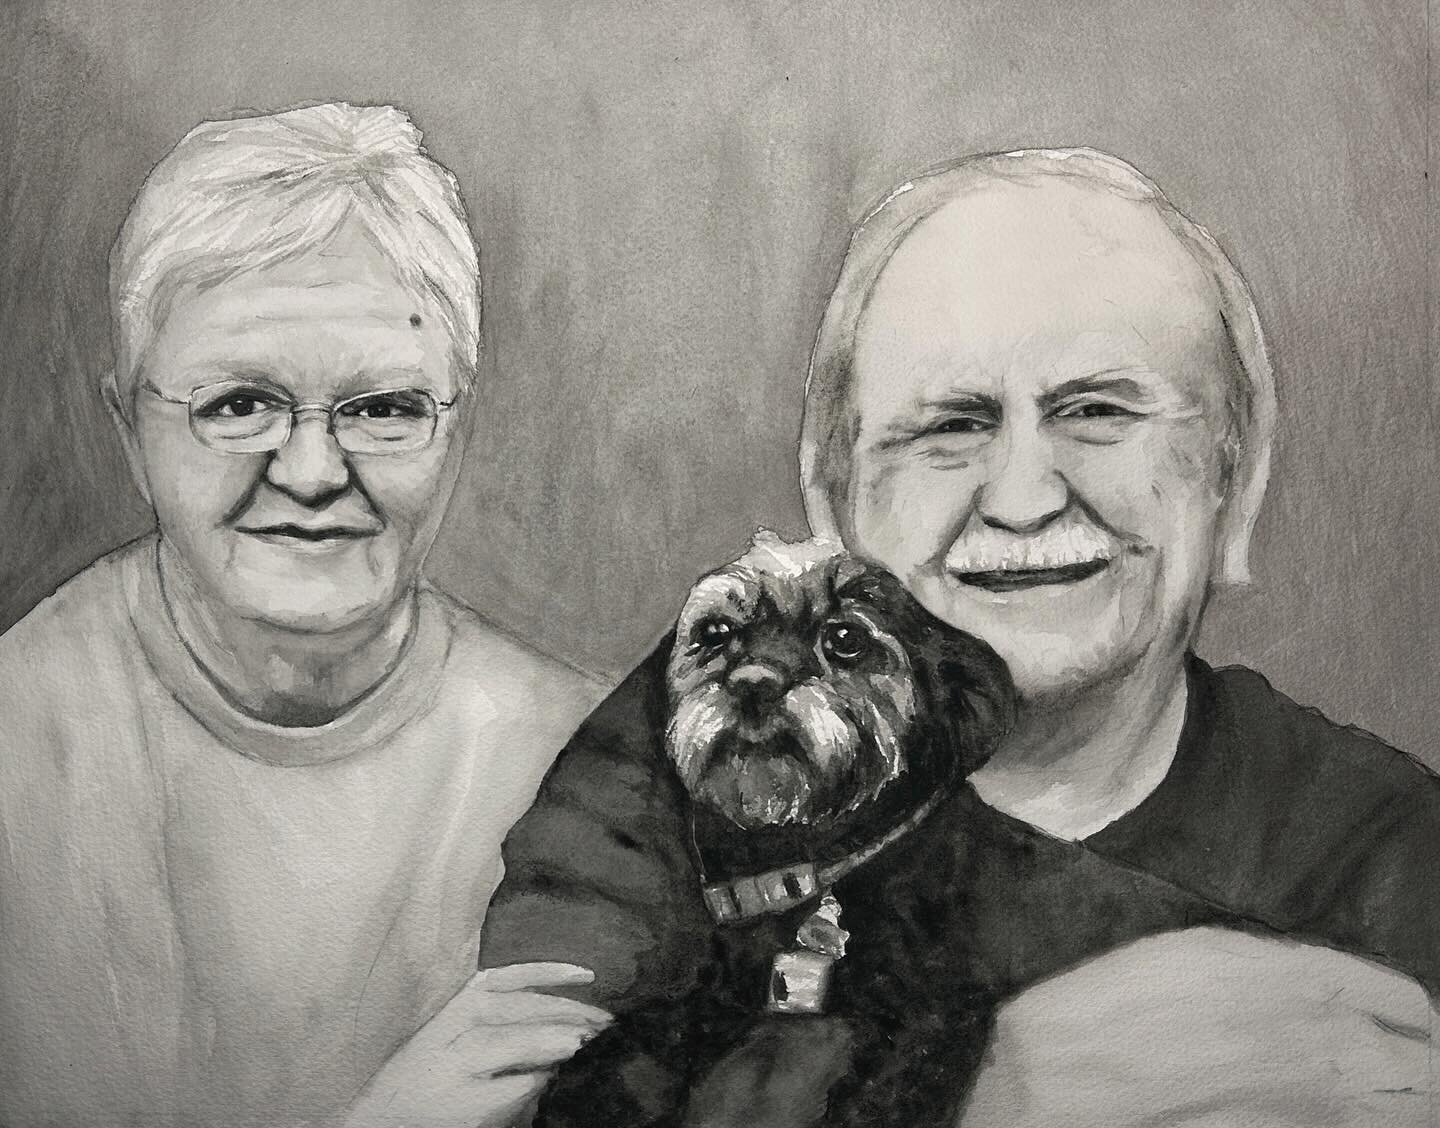 Another sweet family portrait I did a while back that was given to the recipients for Christmas. I swear, being able to share these now is like Christmas Day all over again! 

#art #artist #paint #painter #painting #handmade #watercolor #watercolorar